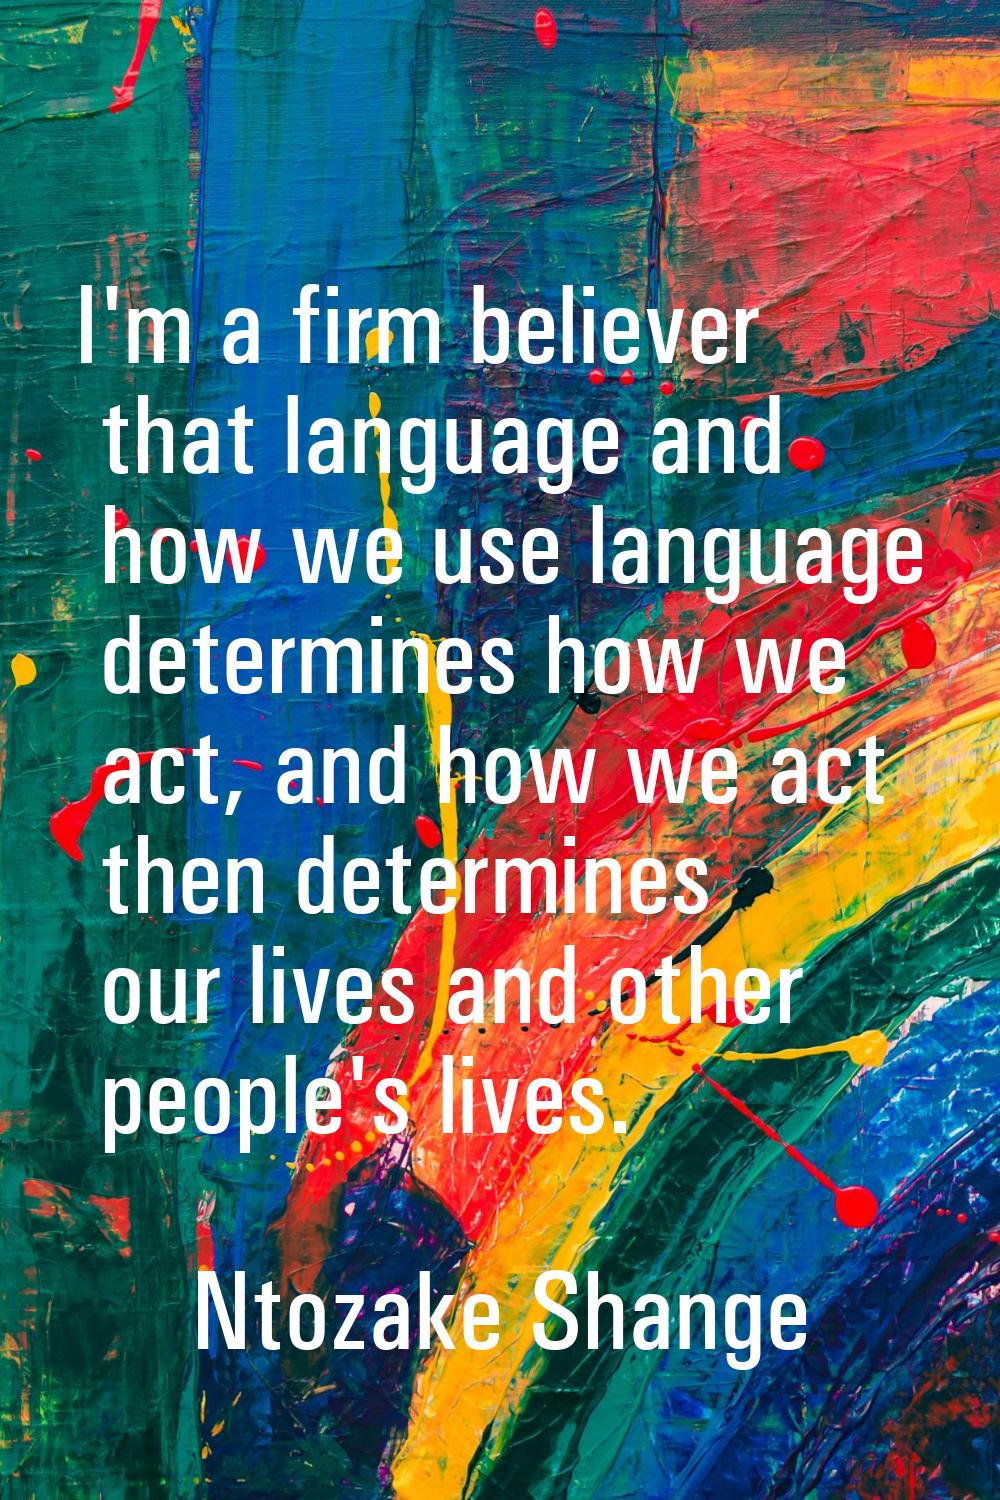 I'm a firm believer that language and how we use language determines how we act, and how we act the